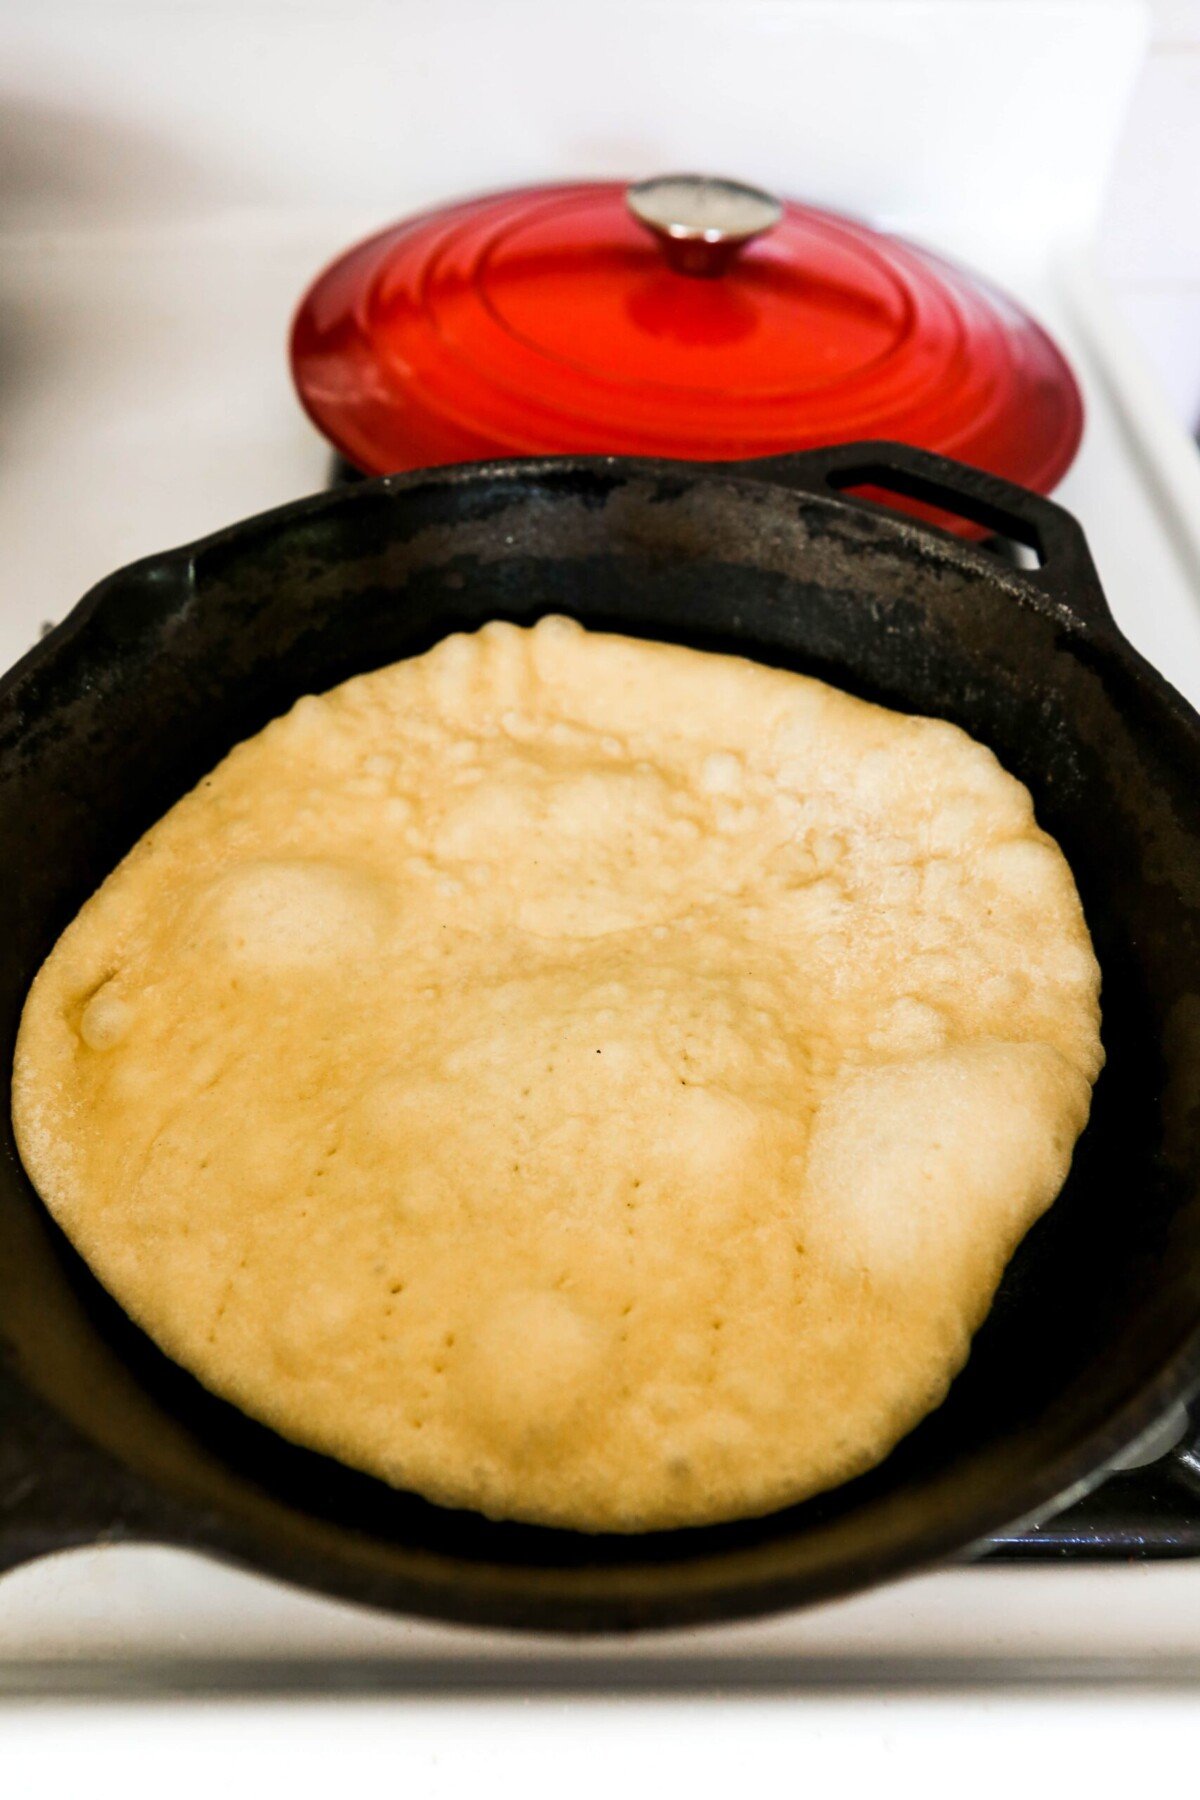 Homemade naan being cooked in a cast-iron skillet